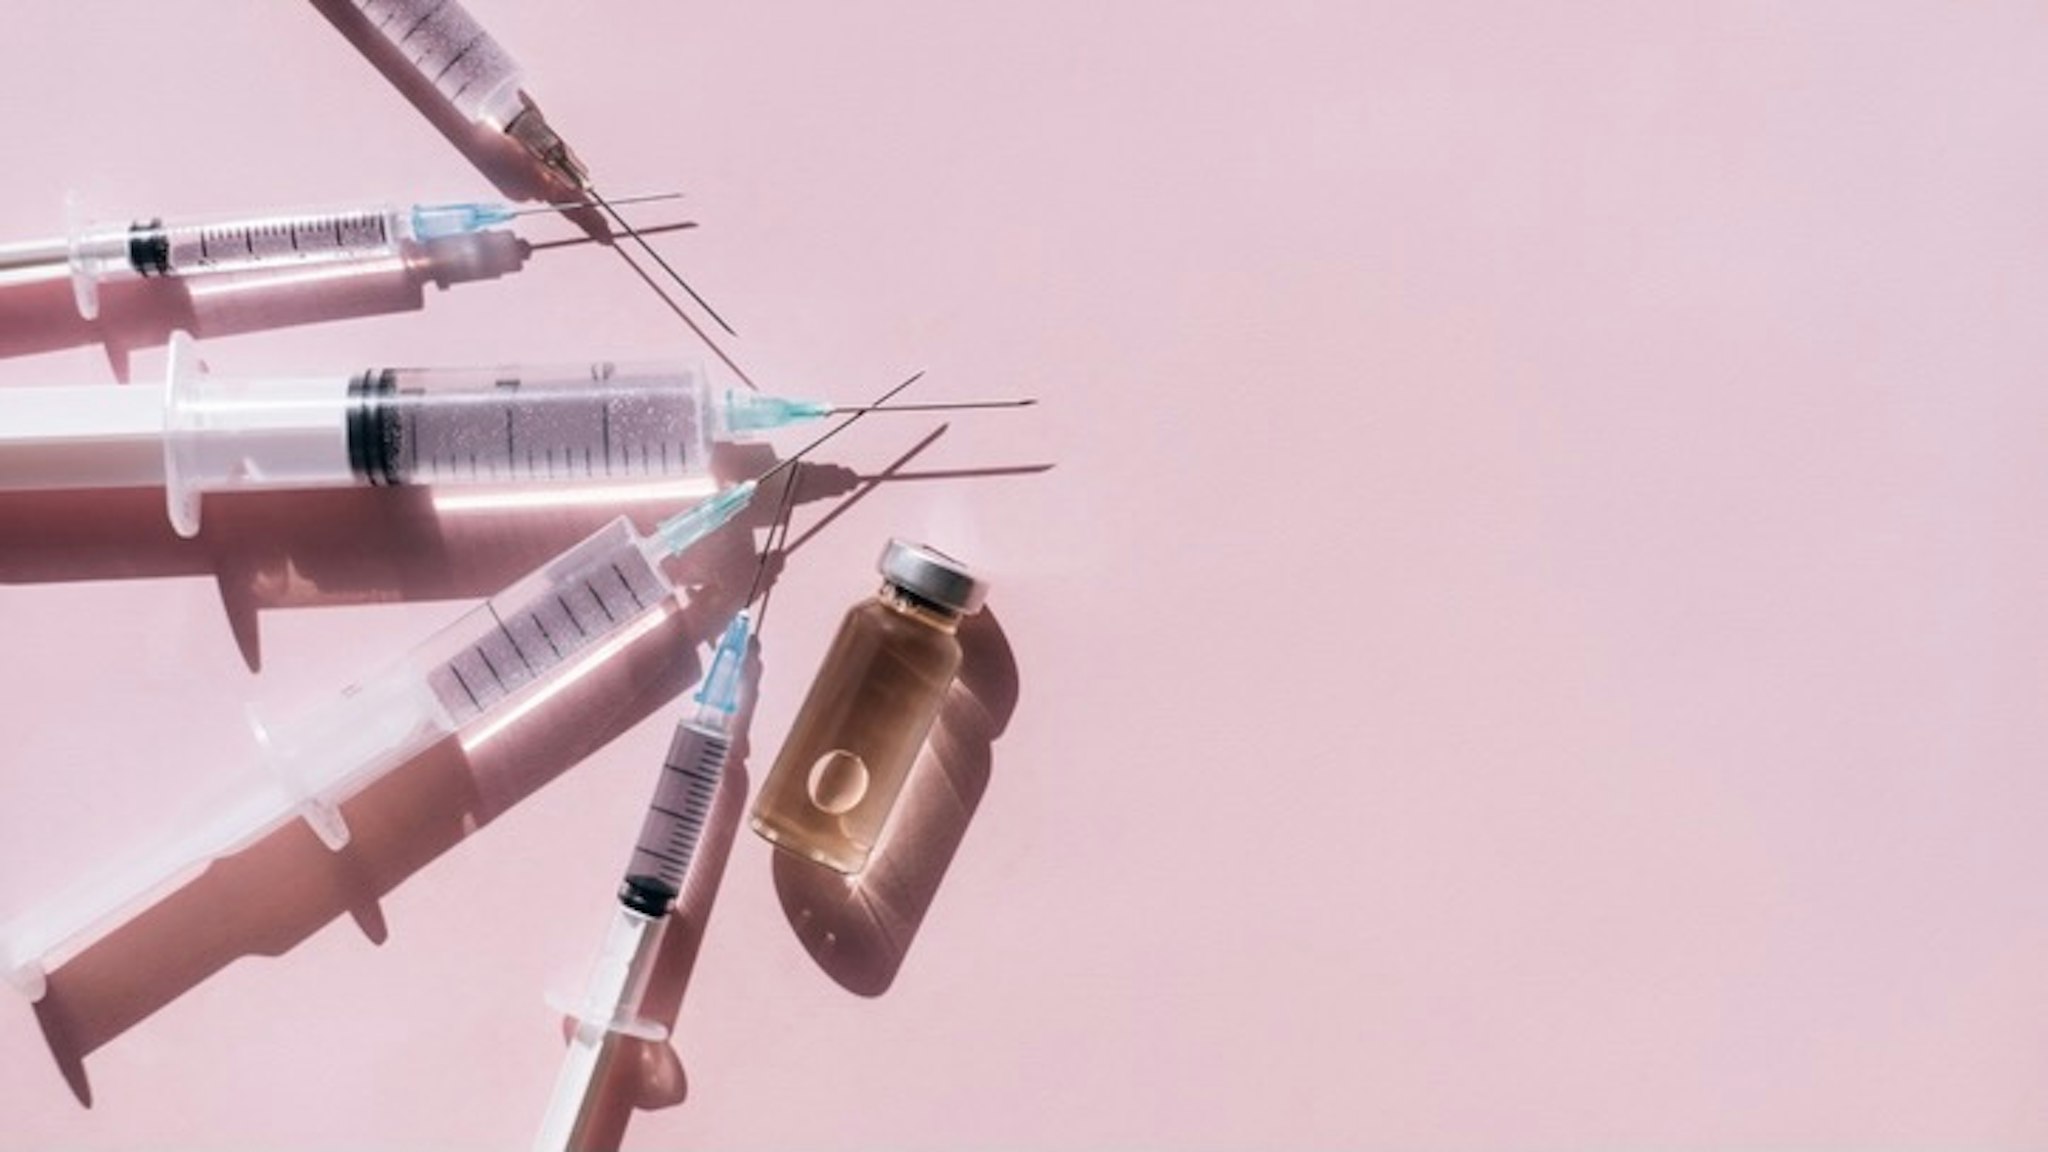 Bunch of syringes near vial of drug. Vaccination is the most anticipated procedure of the year. - stock photo Top view of set of clean syringes placed near glass bottle of medicine with air bubble on pink background. Vaccination is the most anticipated procedure of the year. Anna Efetova via Getty Images